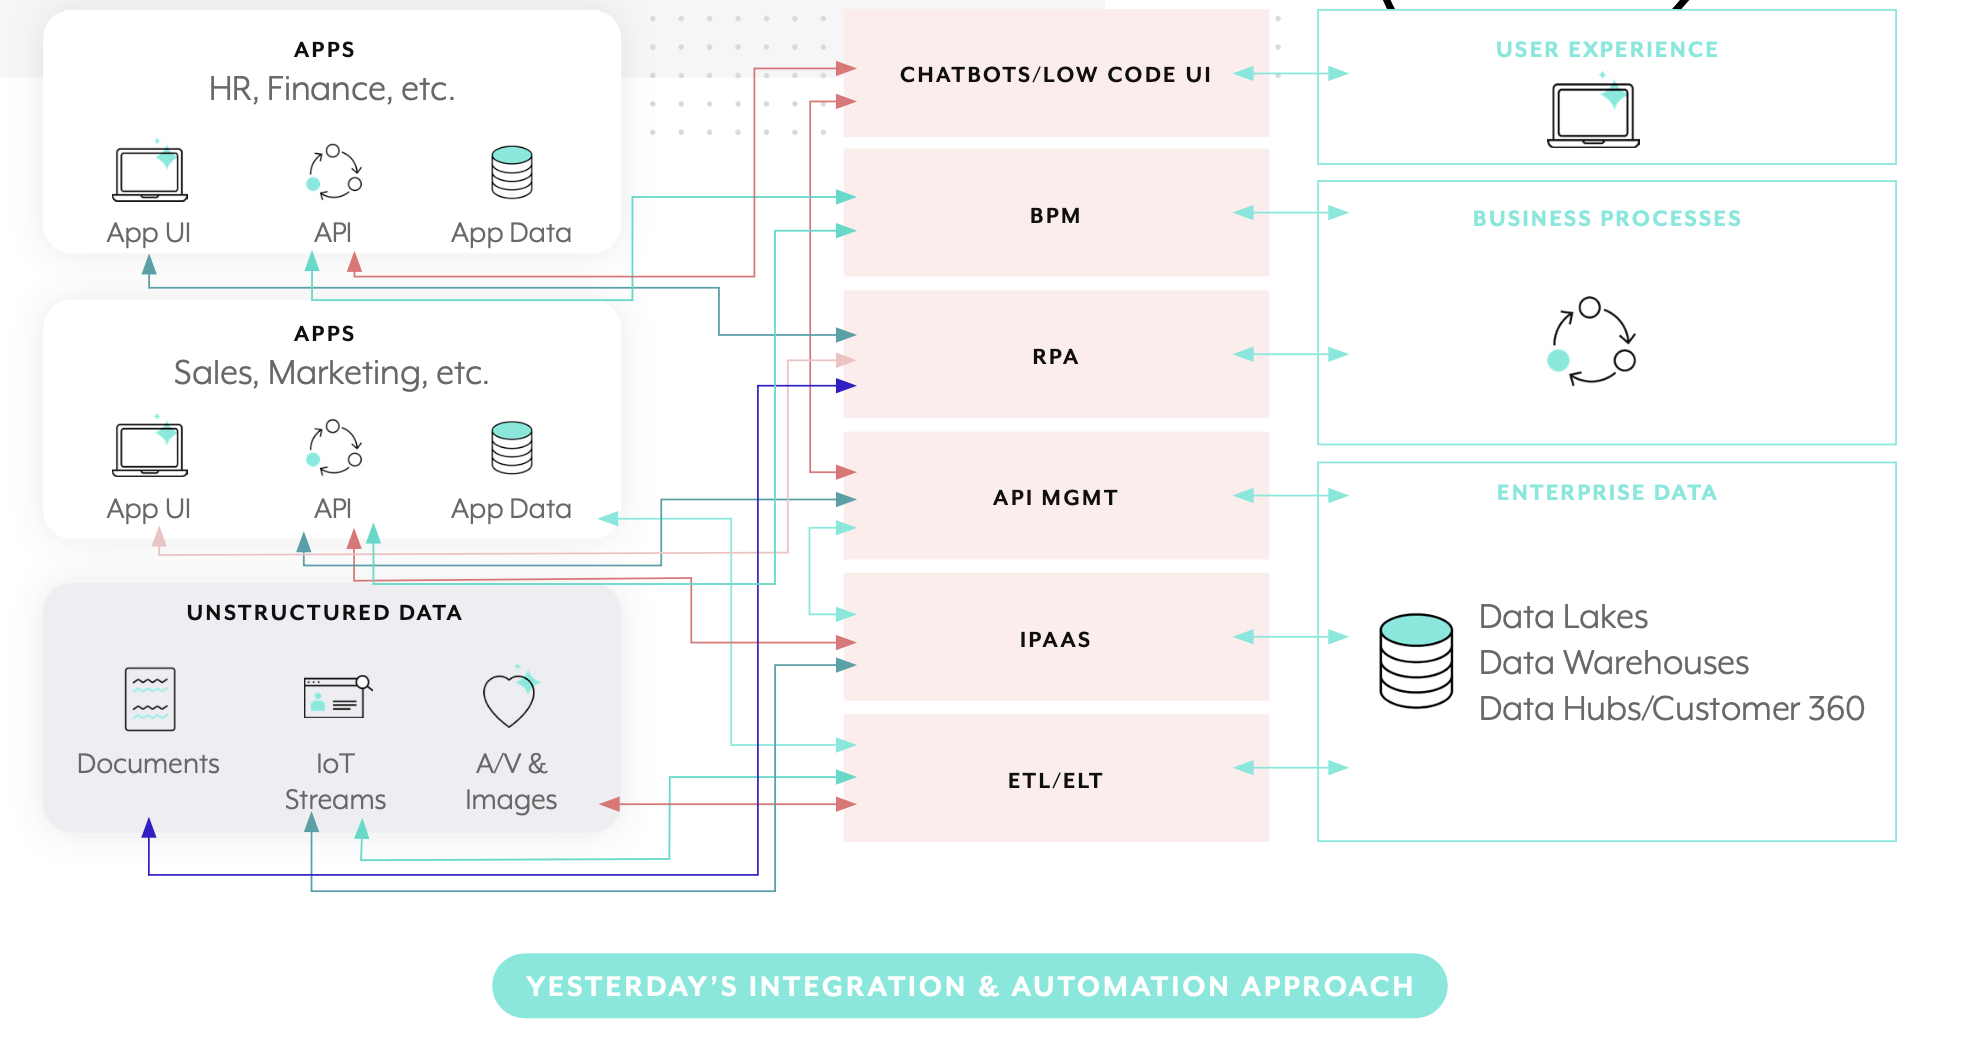 YESTERDAY INTEGRATION & AUTOMATION APPROACH